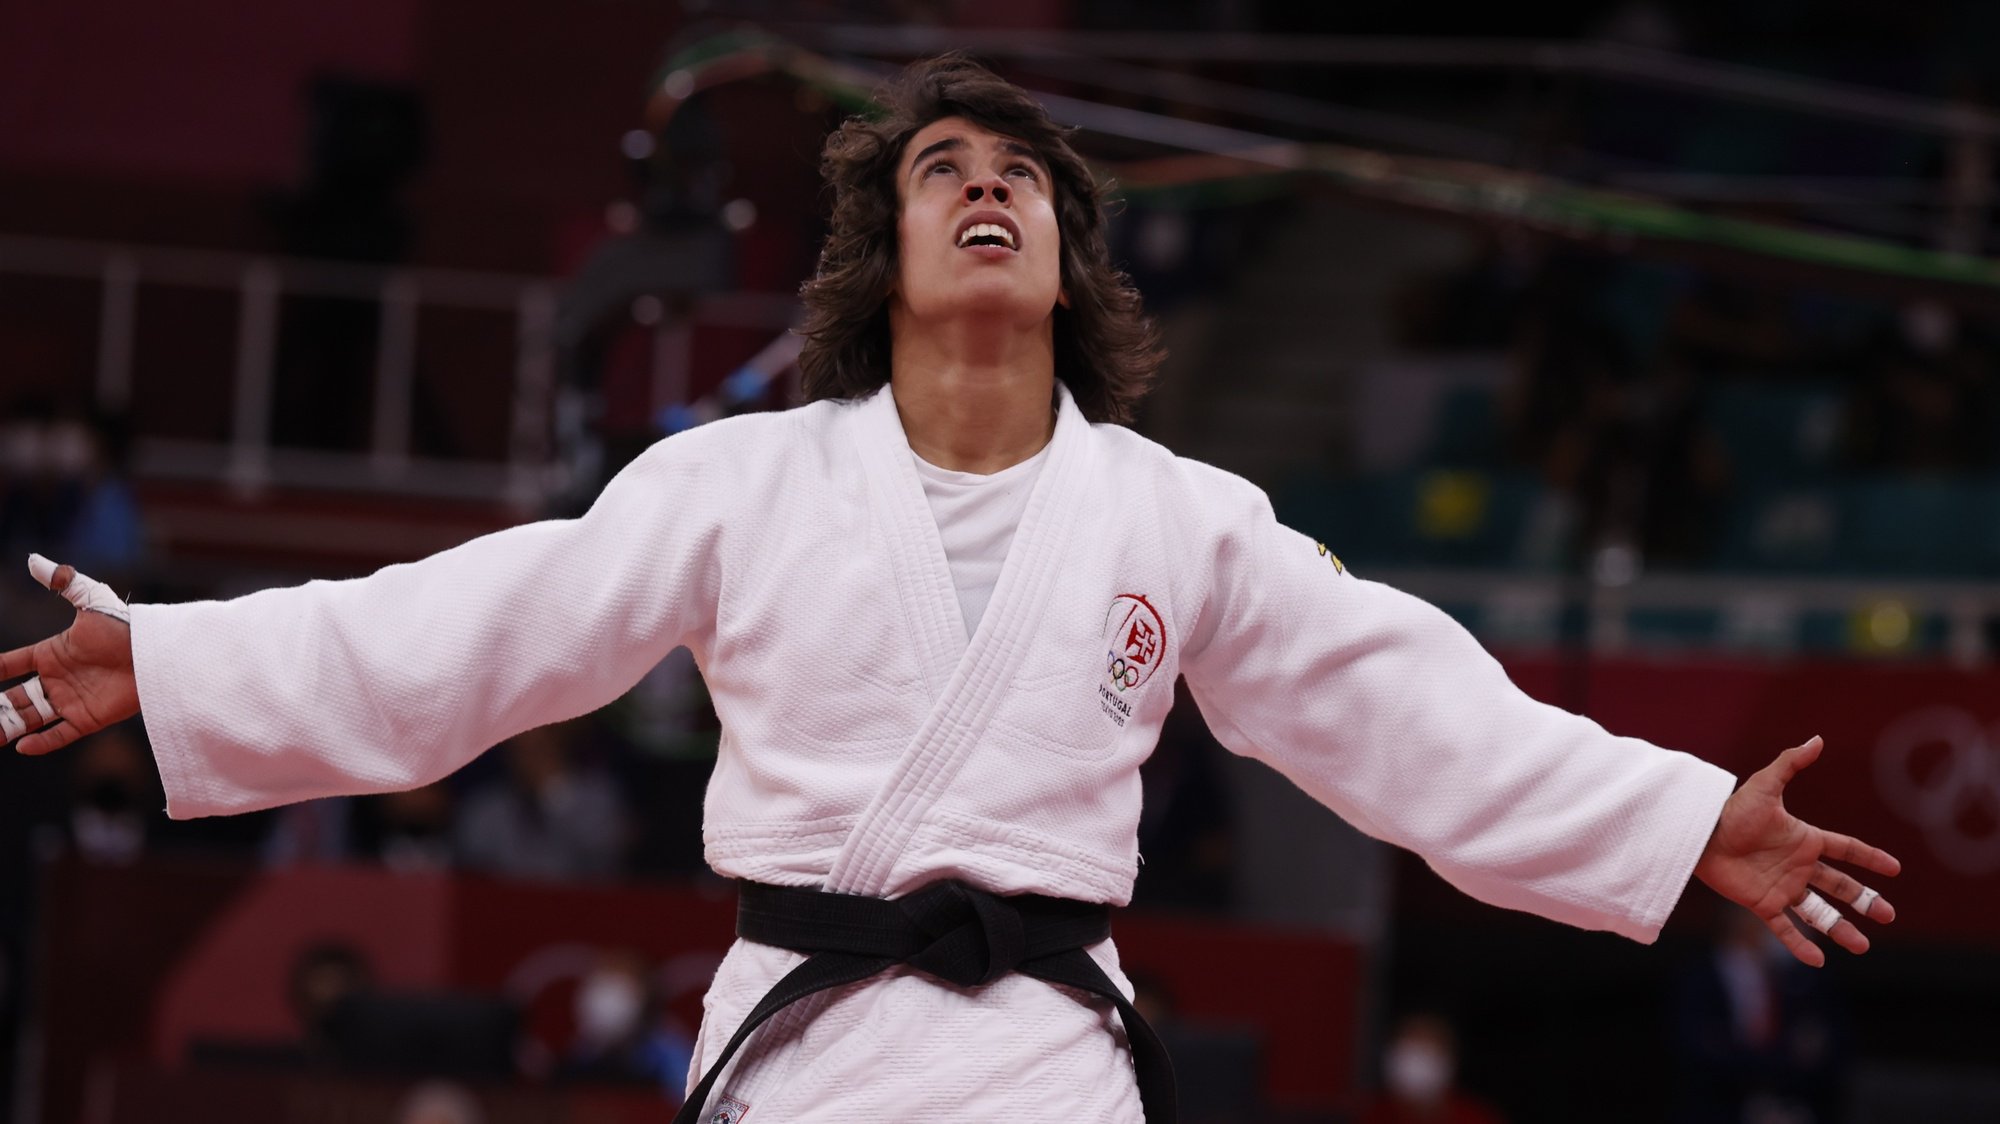 epa09361400 Catarina Costa of Portugal celebrates after defeating Paula Pareto of Argentina during their Repechage bout in the Women -48 kg at the Judo competitions of the Tokyo 2020 Olympic Games at the Nippon Budokan arena in Tokyo, Japan, 24 July 2021.  EPA/JEON HEON-KYUN